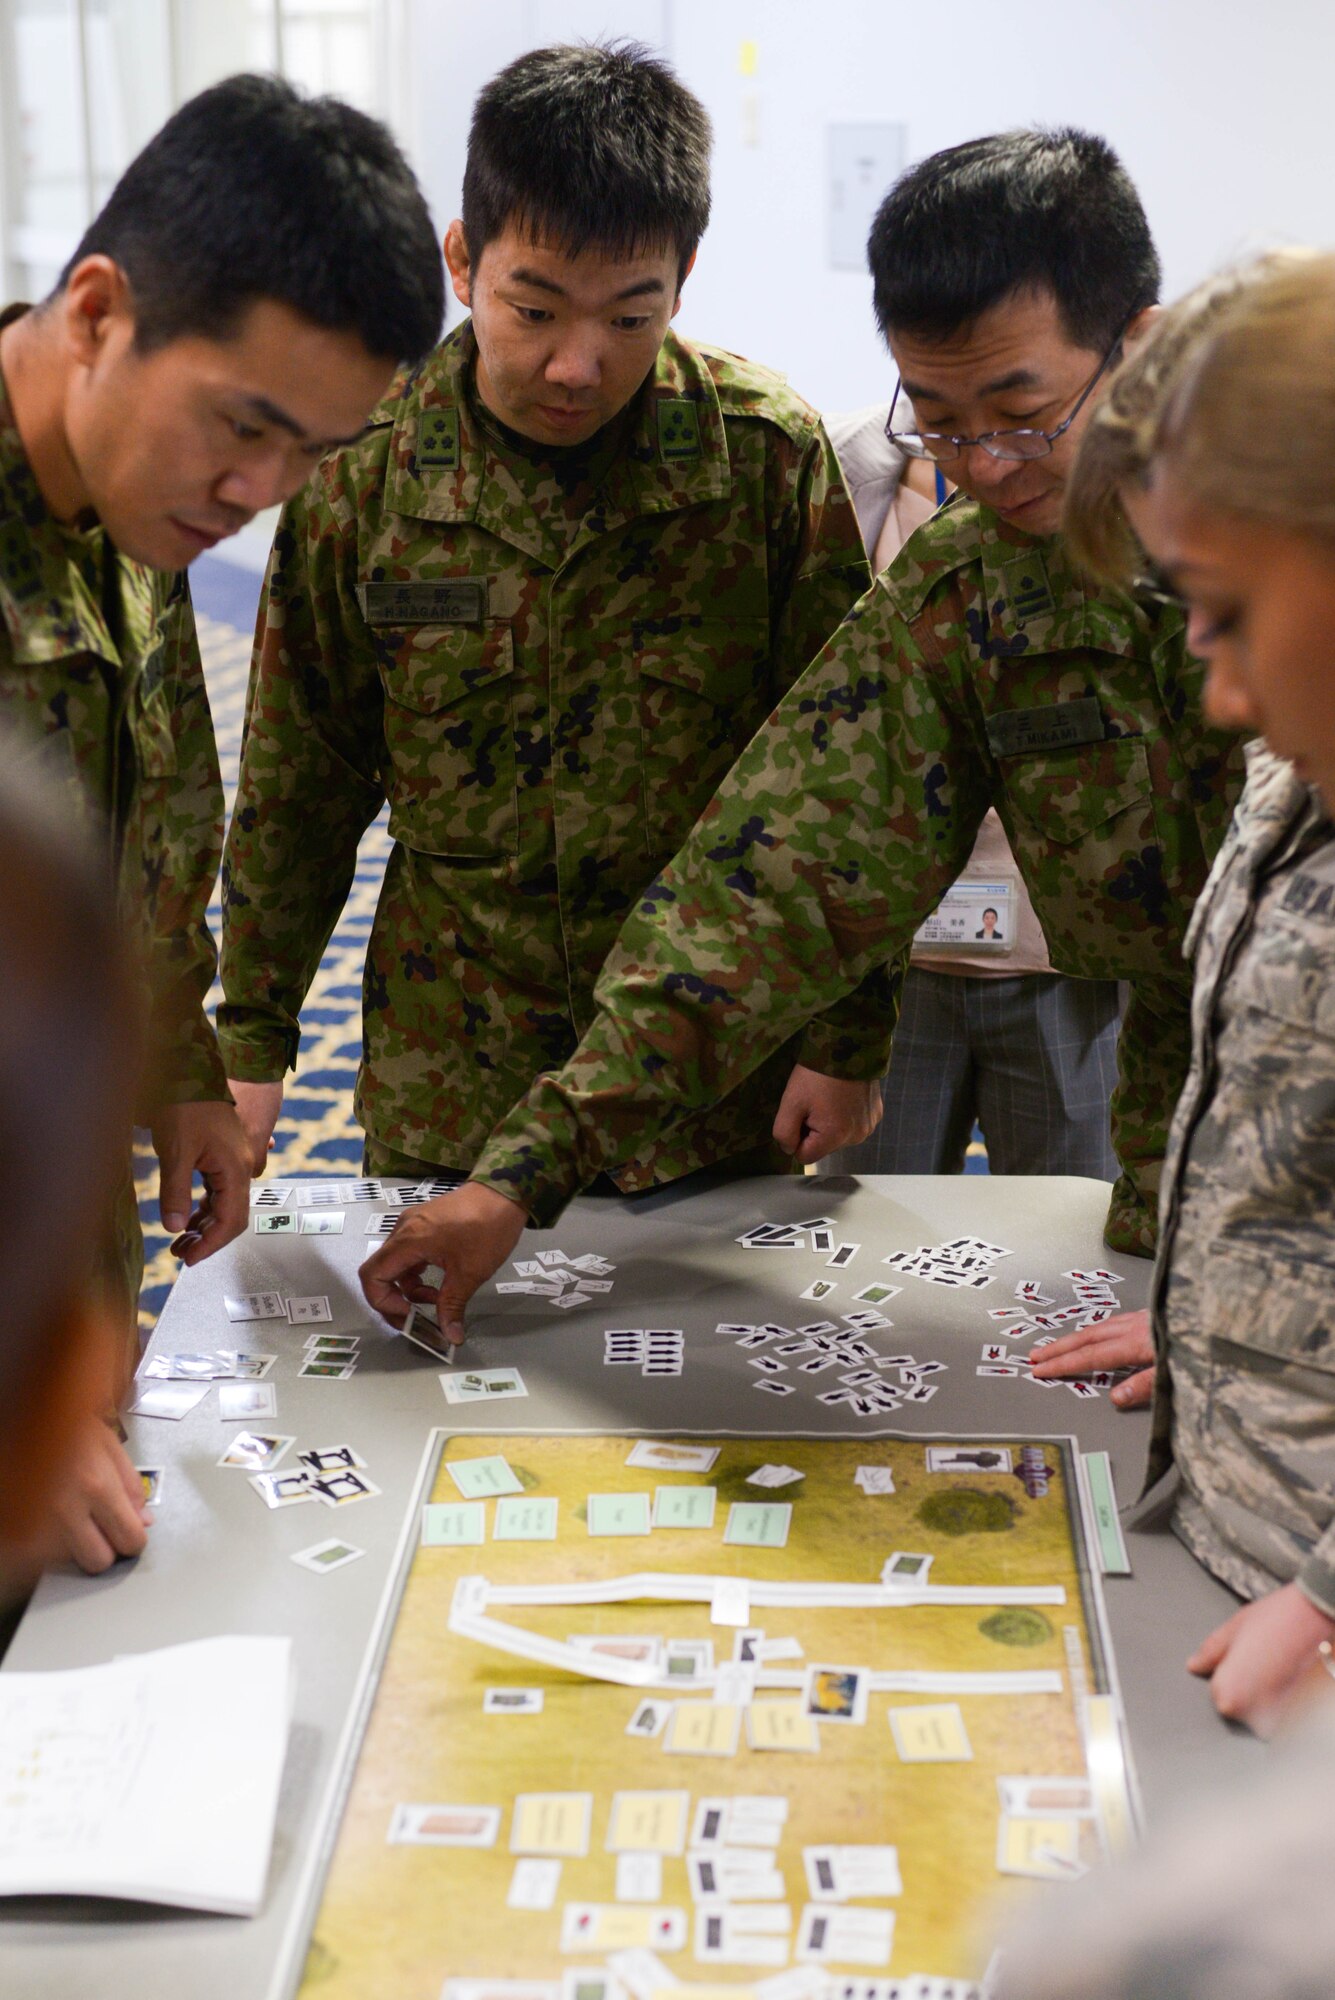 Japanese Ground Defense Forces demonstrate their plans to set up a decontamination area during a tabletop simulation at Yokota Air Base, Japan, August 8, 2018.